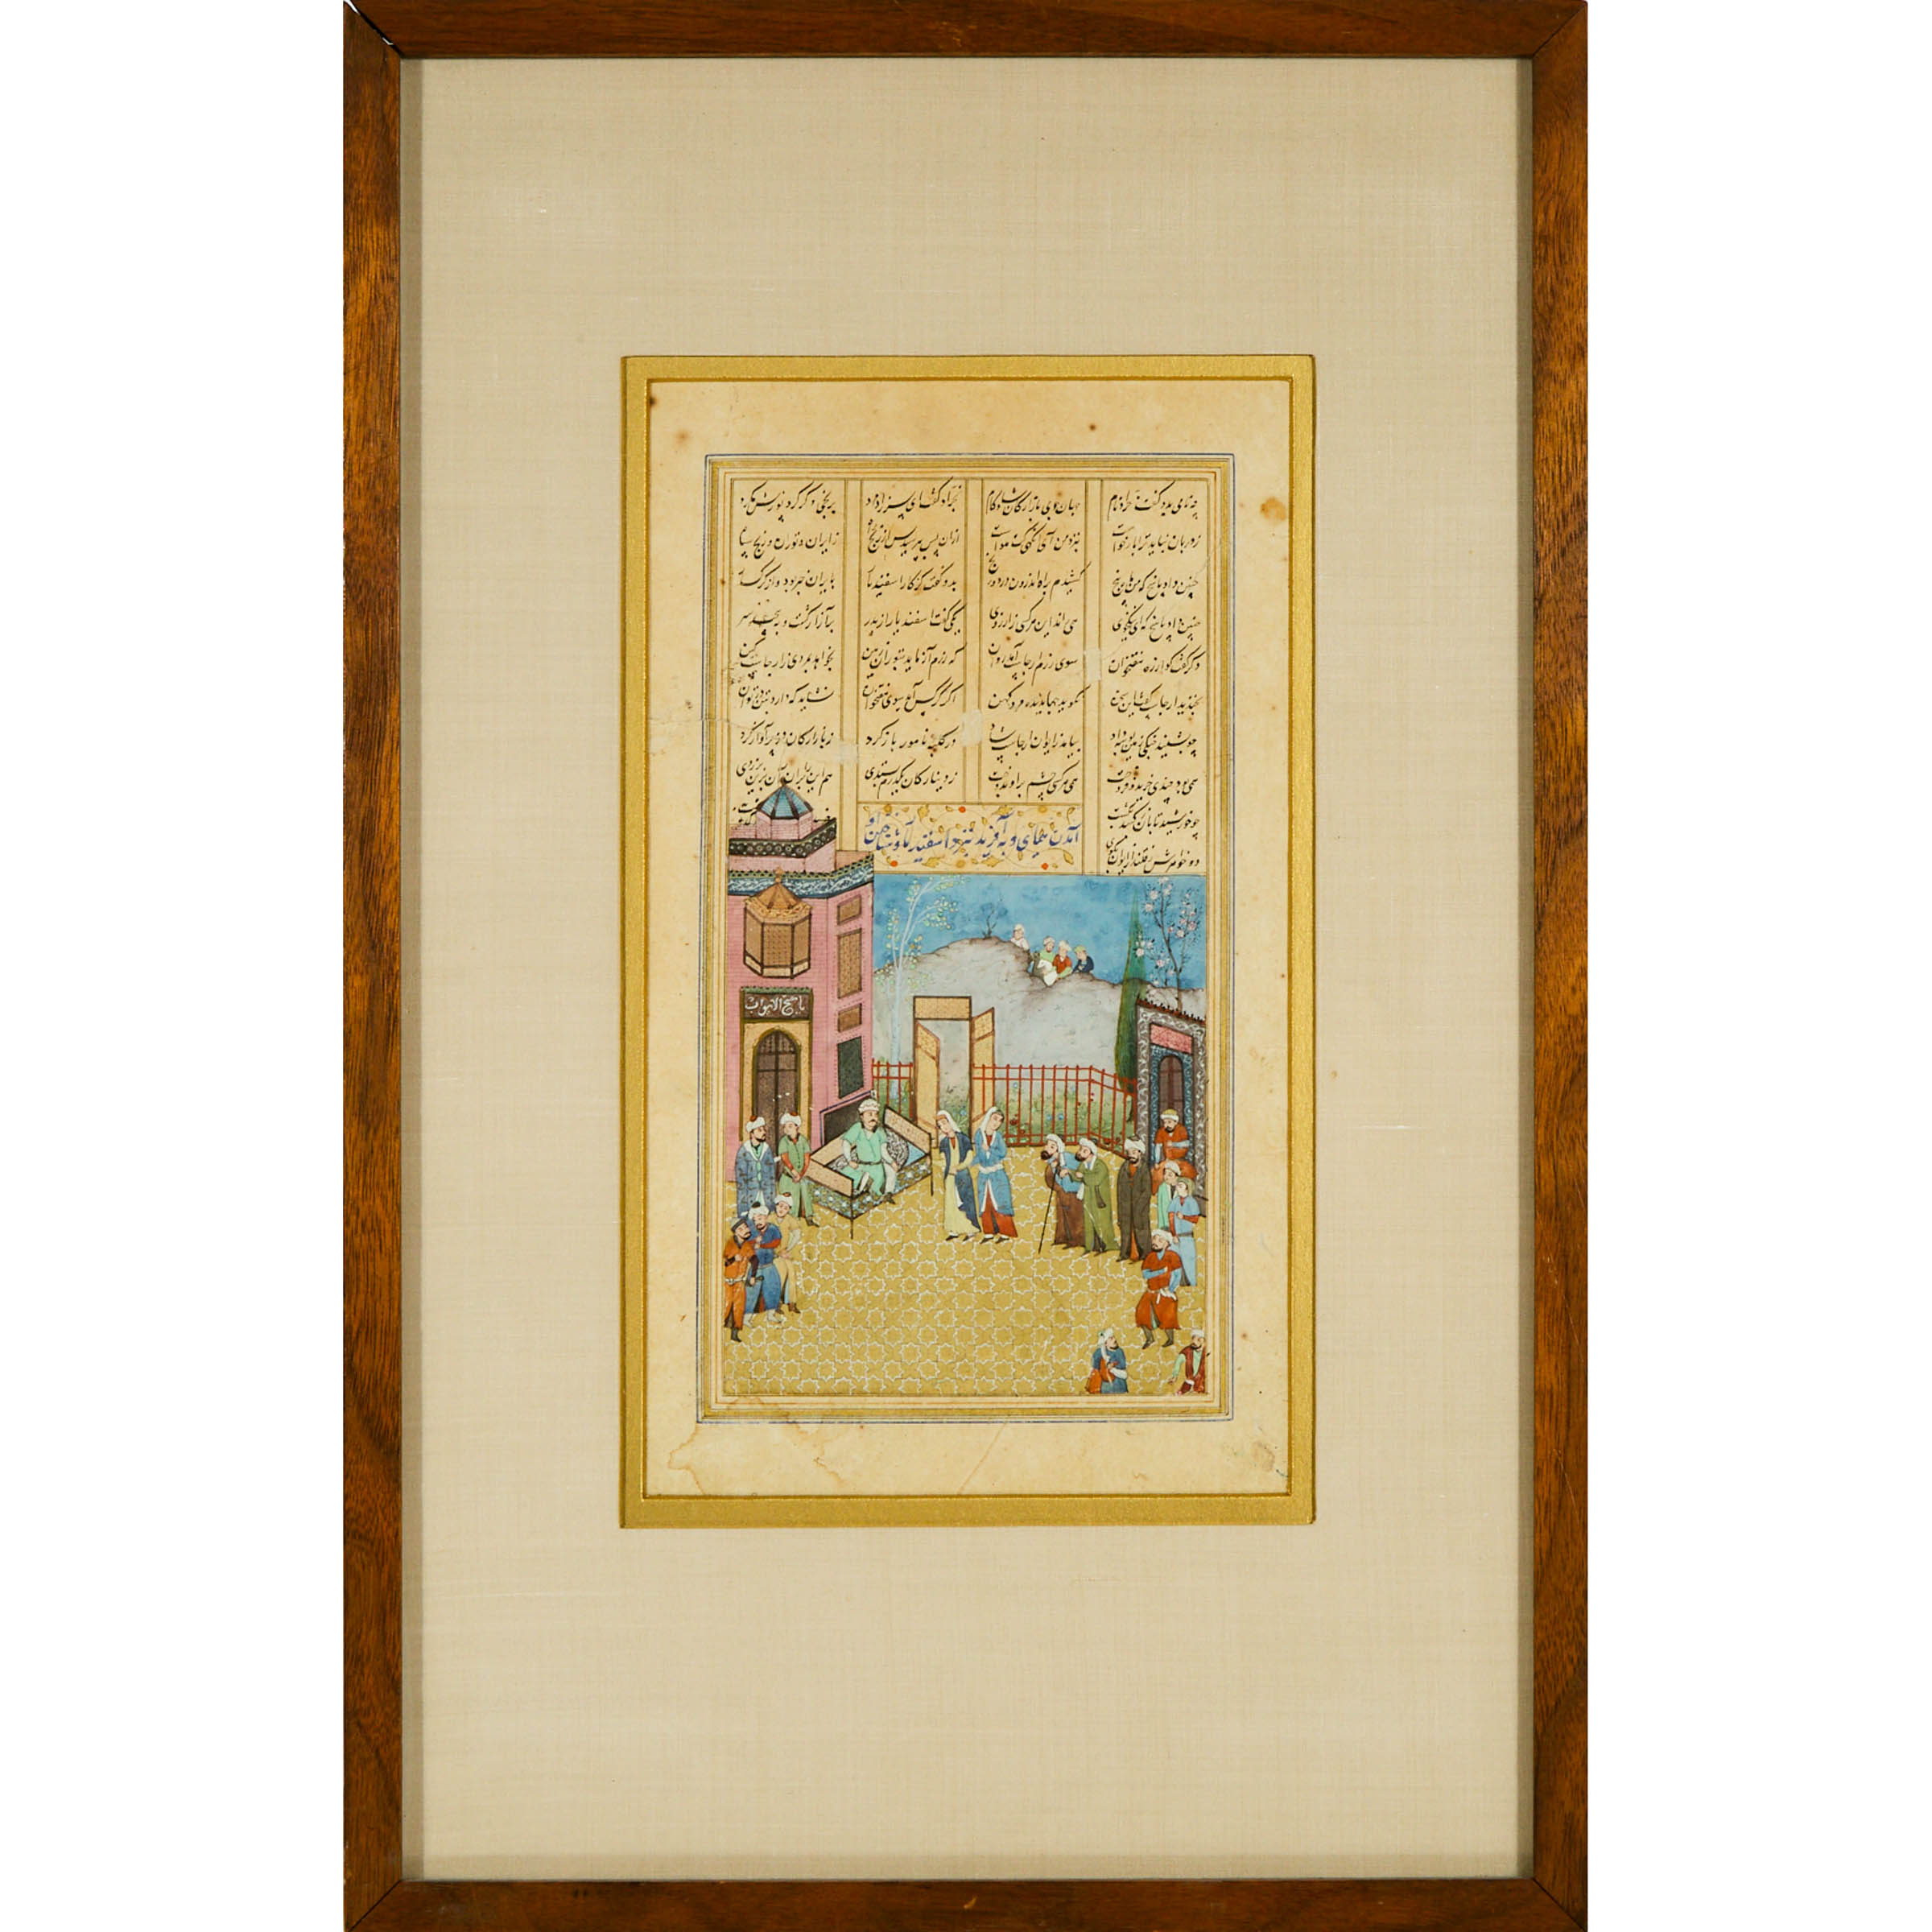 An Indian Miniature Painting, Together With a Persian Double-Sided Manuscript and Two Persian Textiles, 19th Century